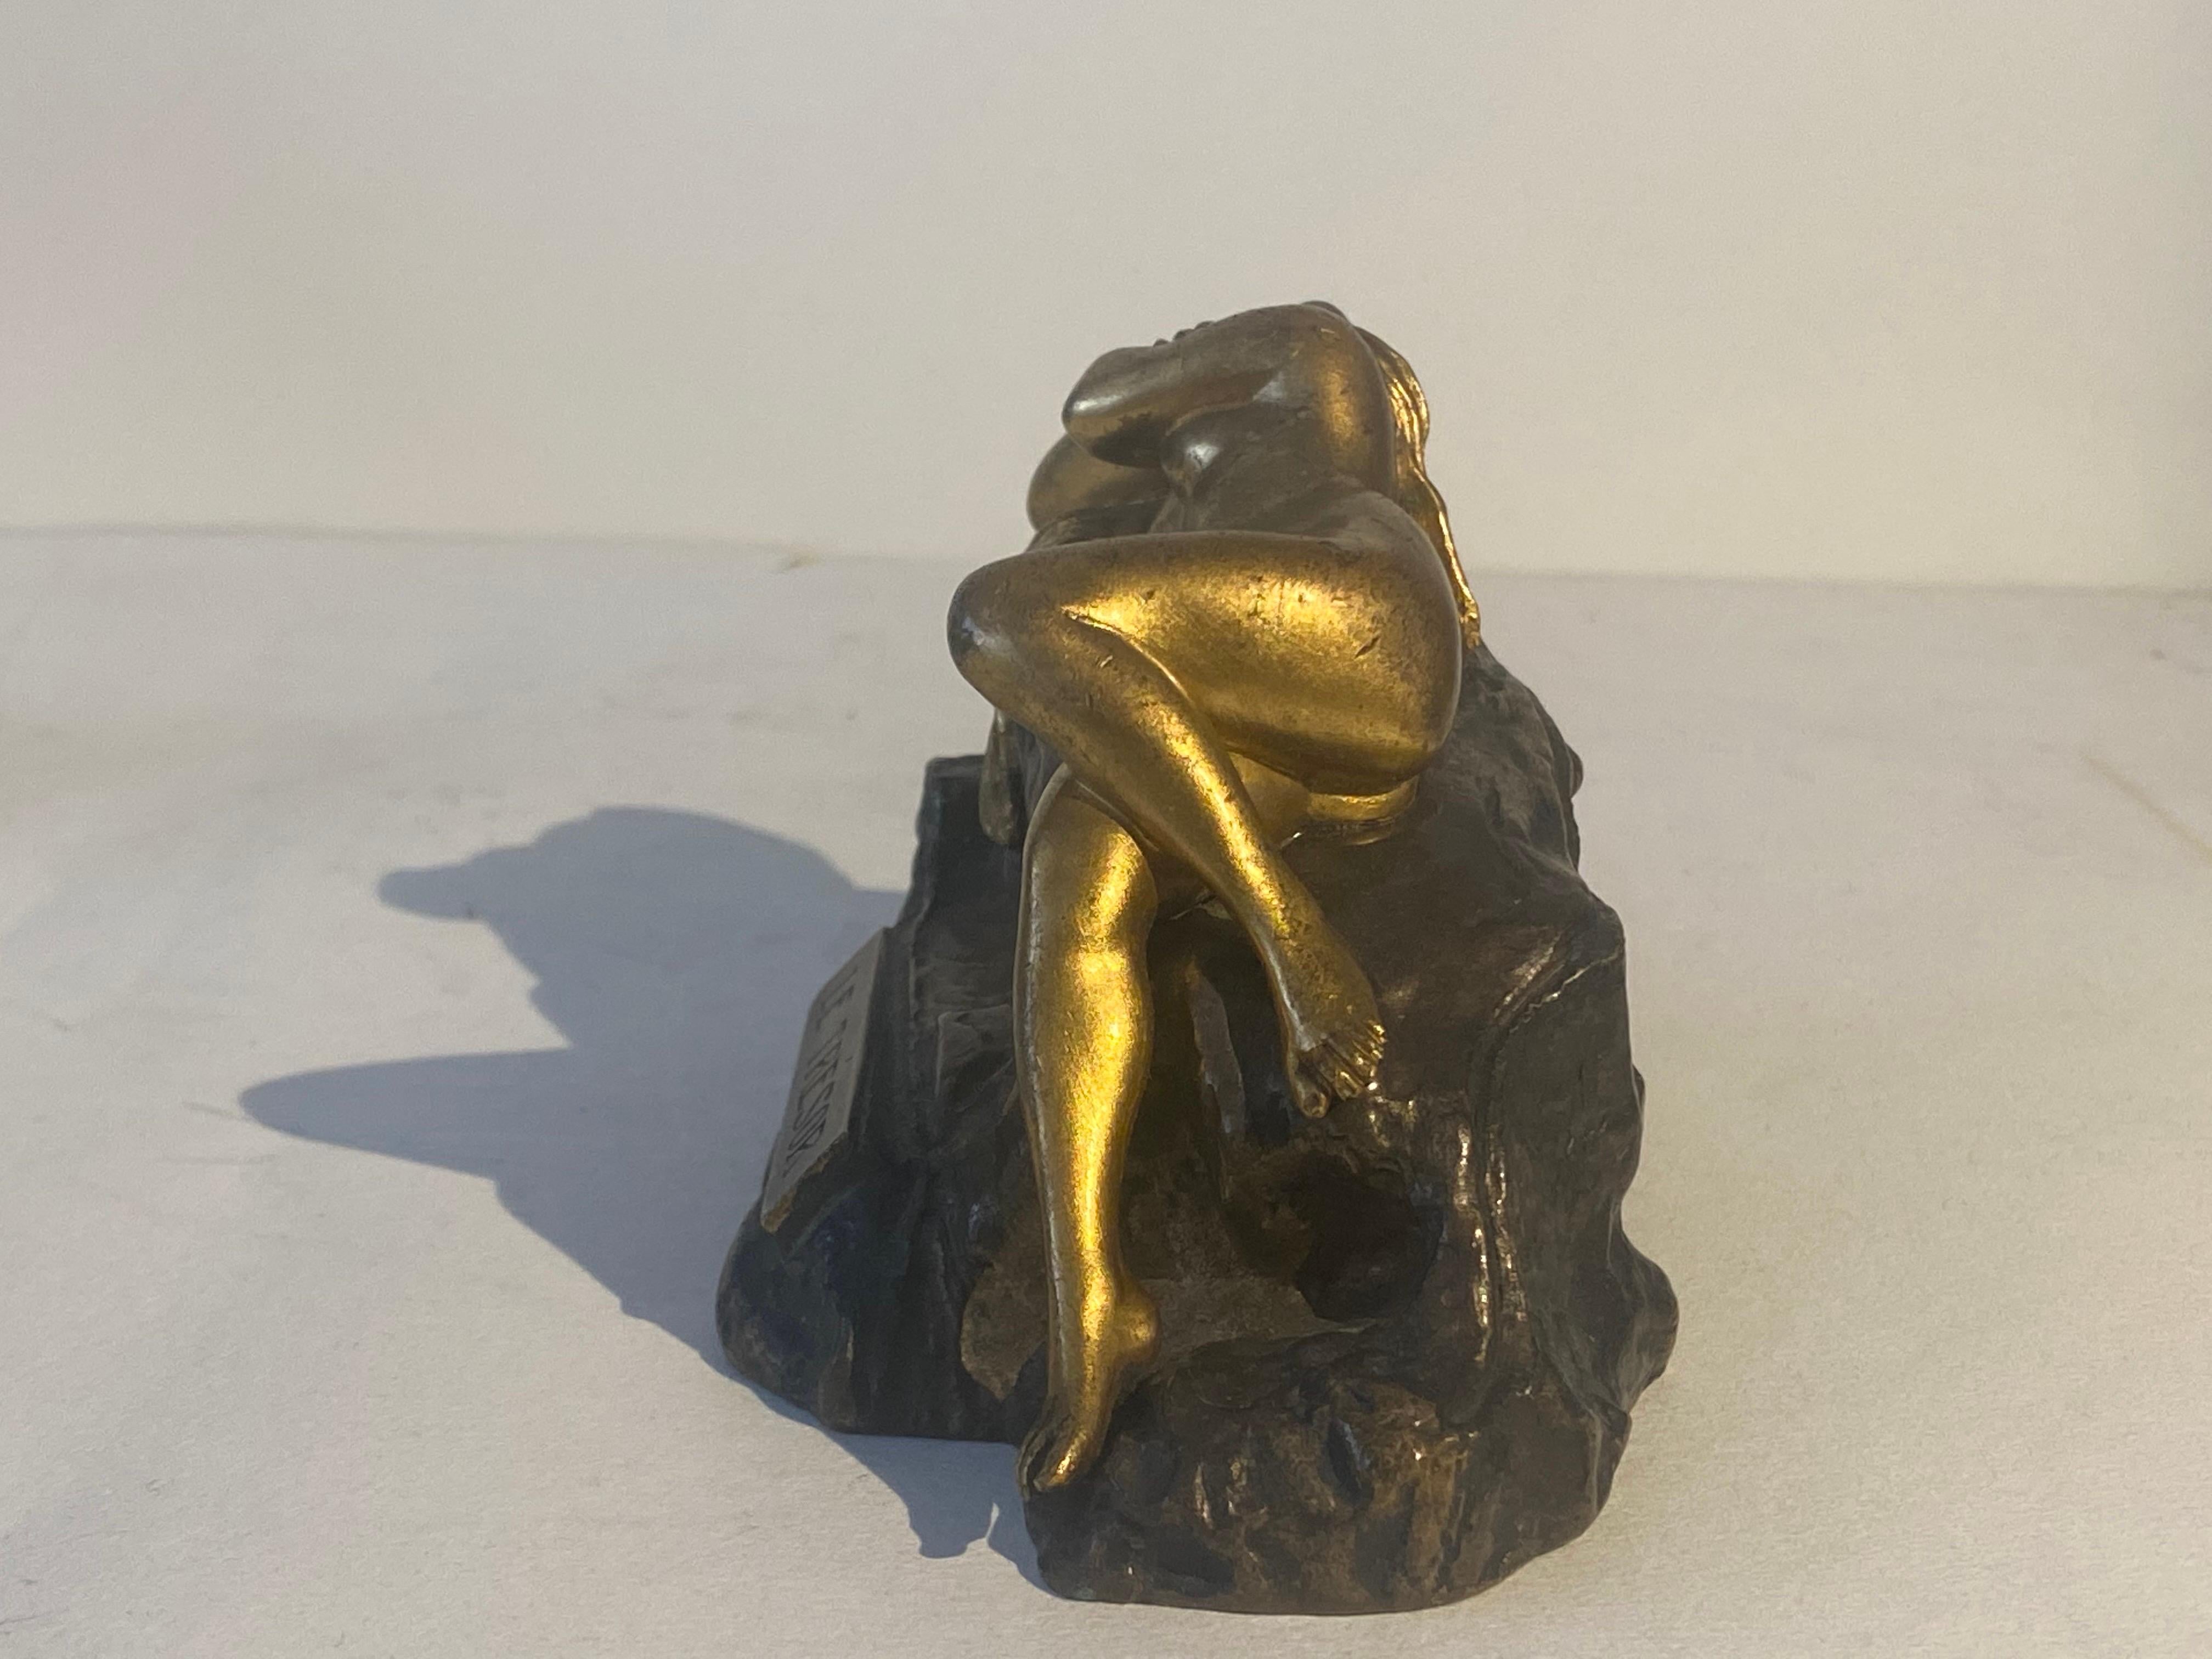 Asuperb quality early 20th century Austrian bronze study of a young man digging in search of treasure. The top of the bronze lifting to reveal the buried treasure of a reclining naked beauty in gilt bronze, exhibiting excellent hand finished detail